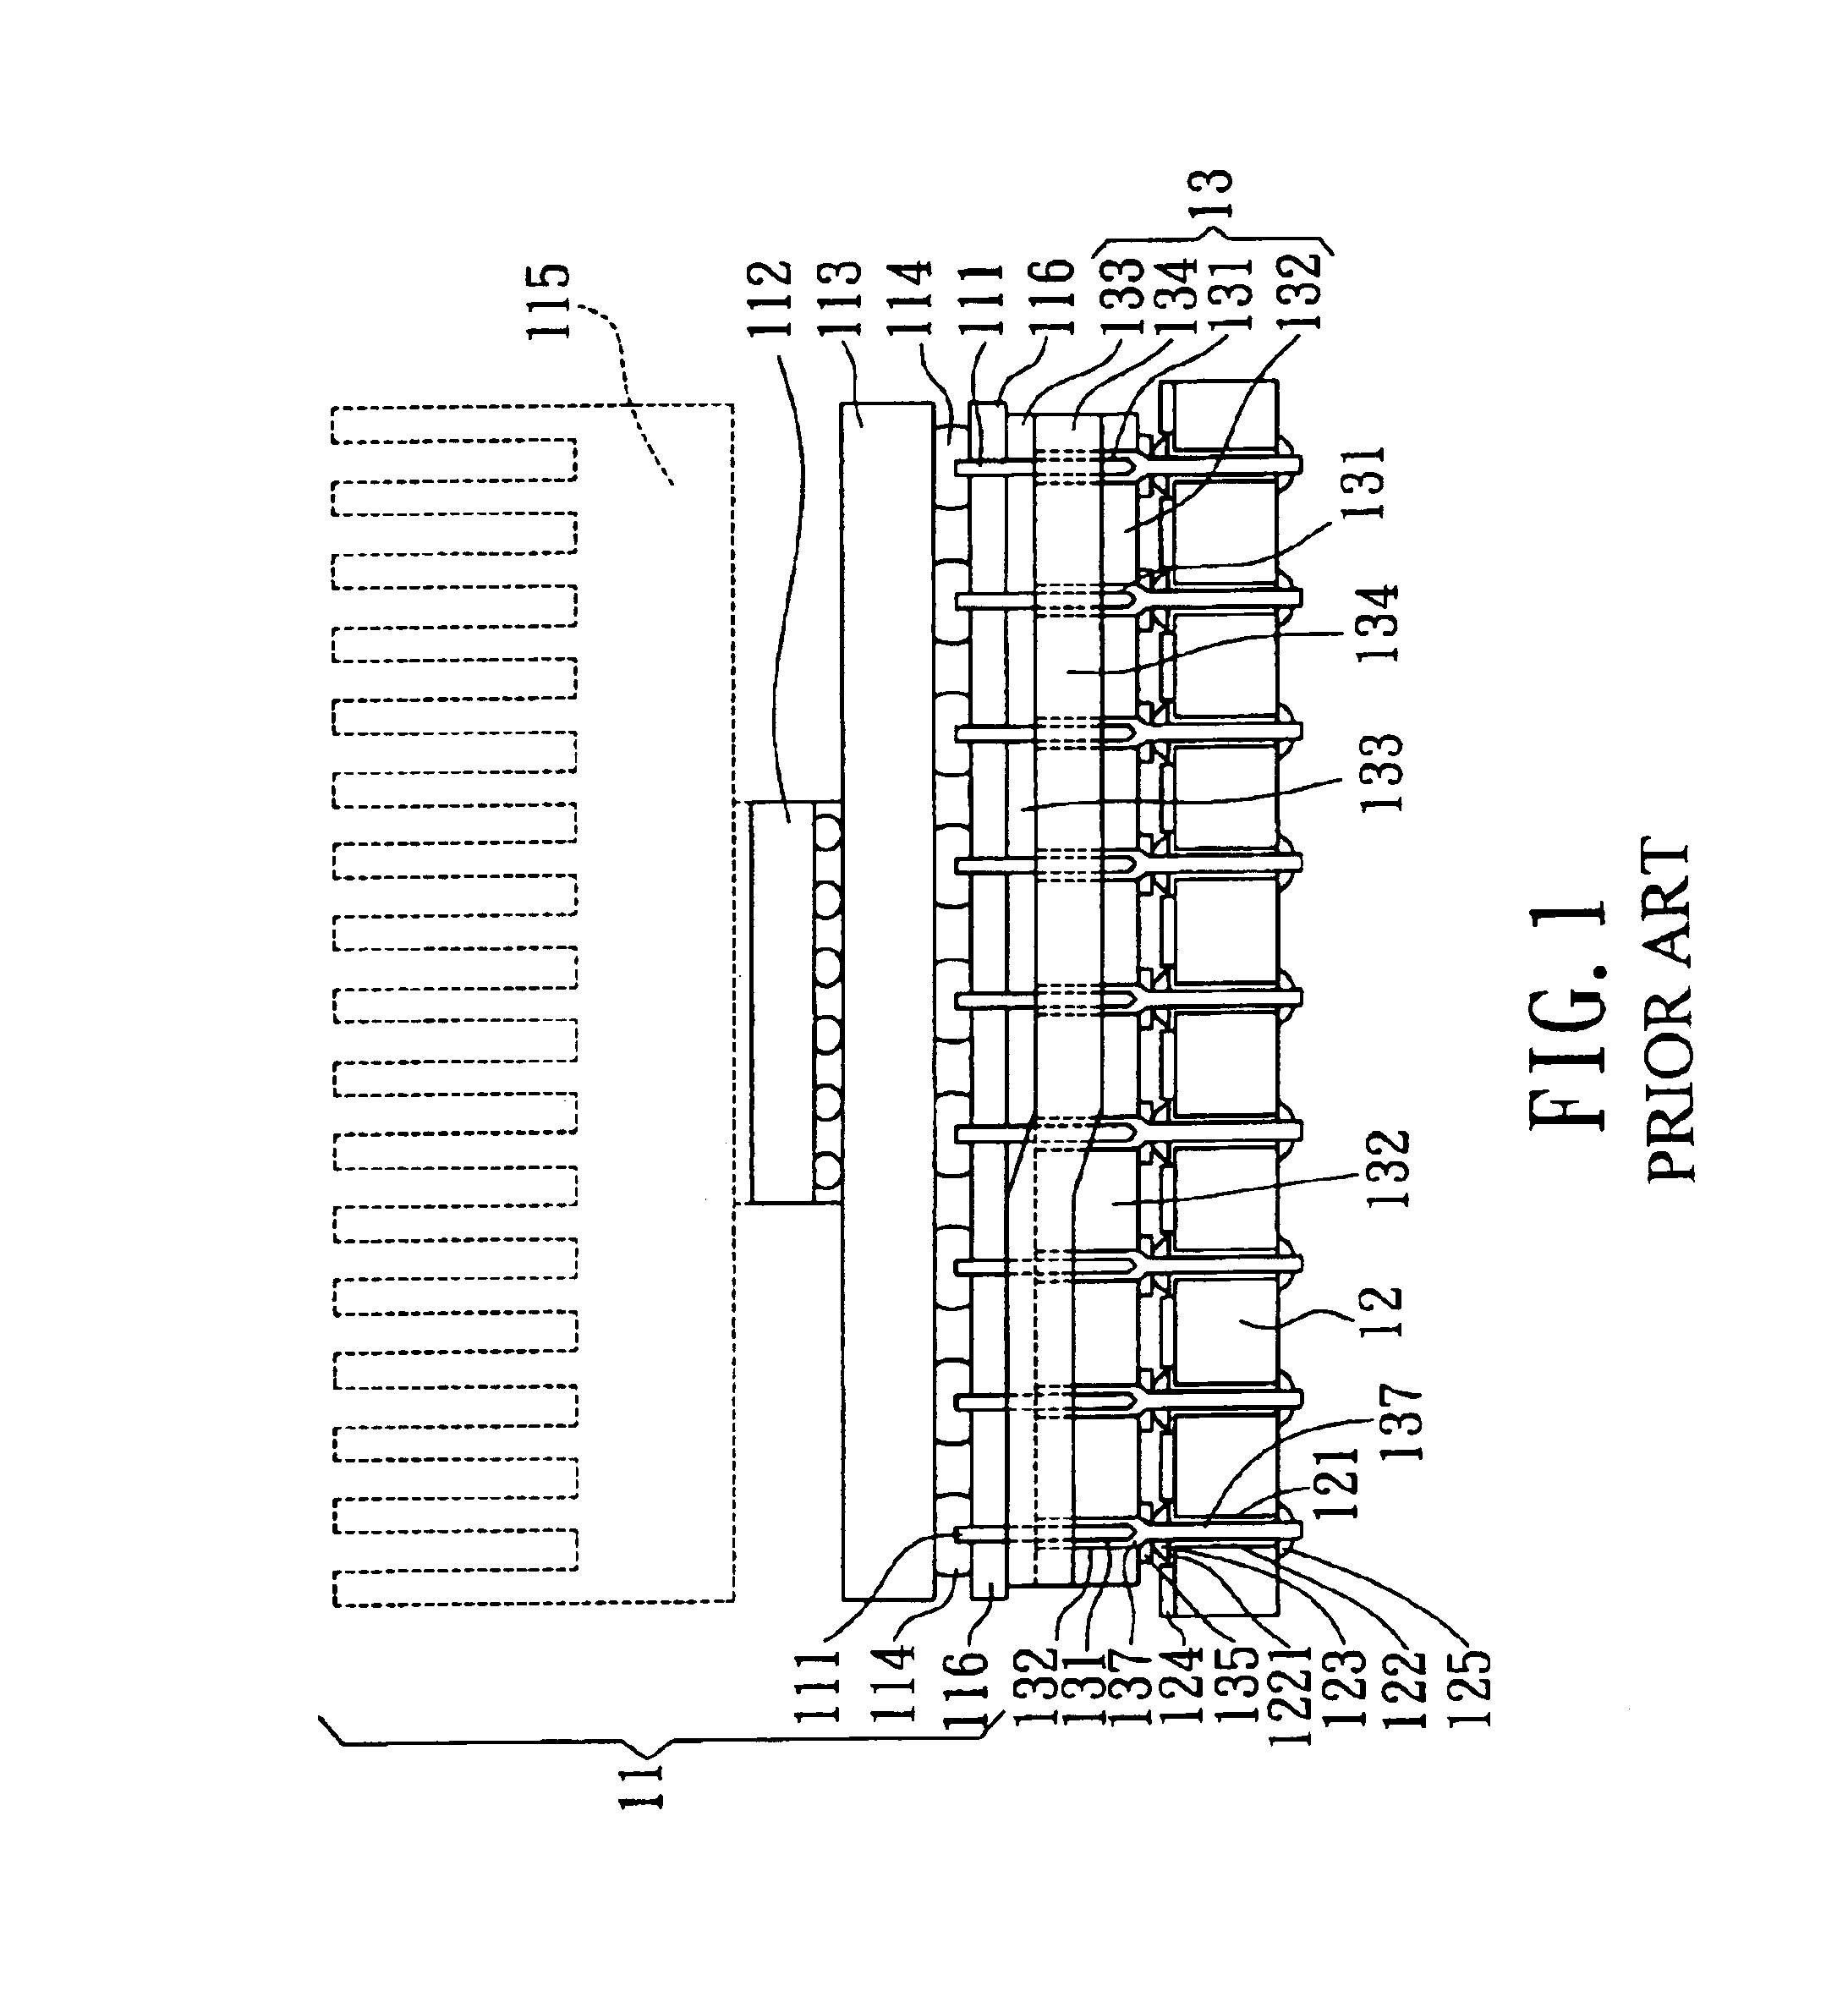 Electrical connection device between a pin-typed IC package and a circuit board